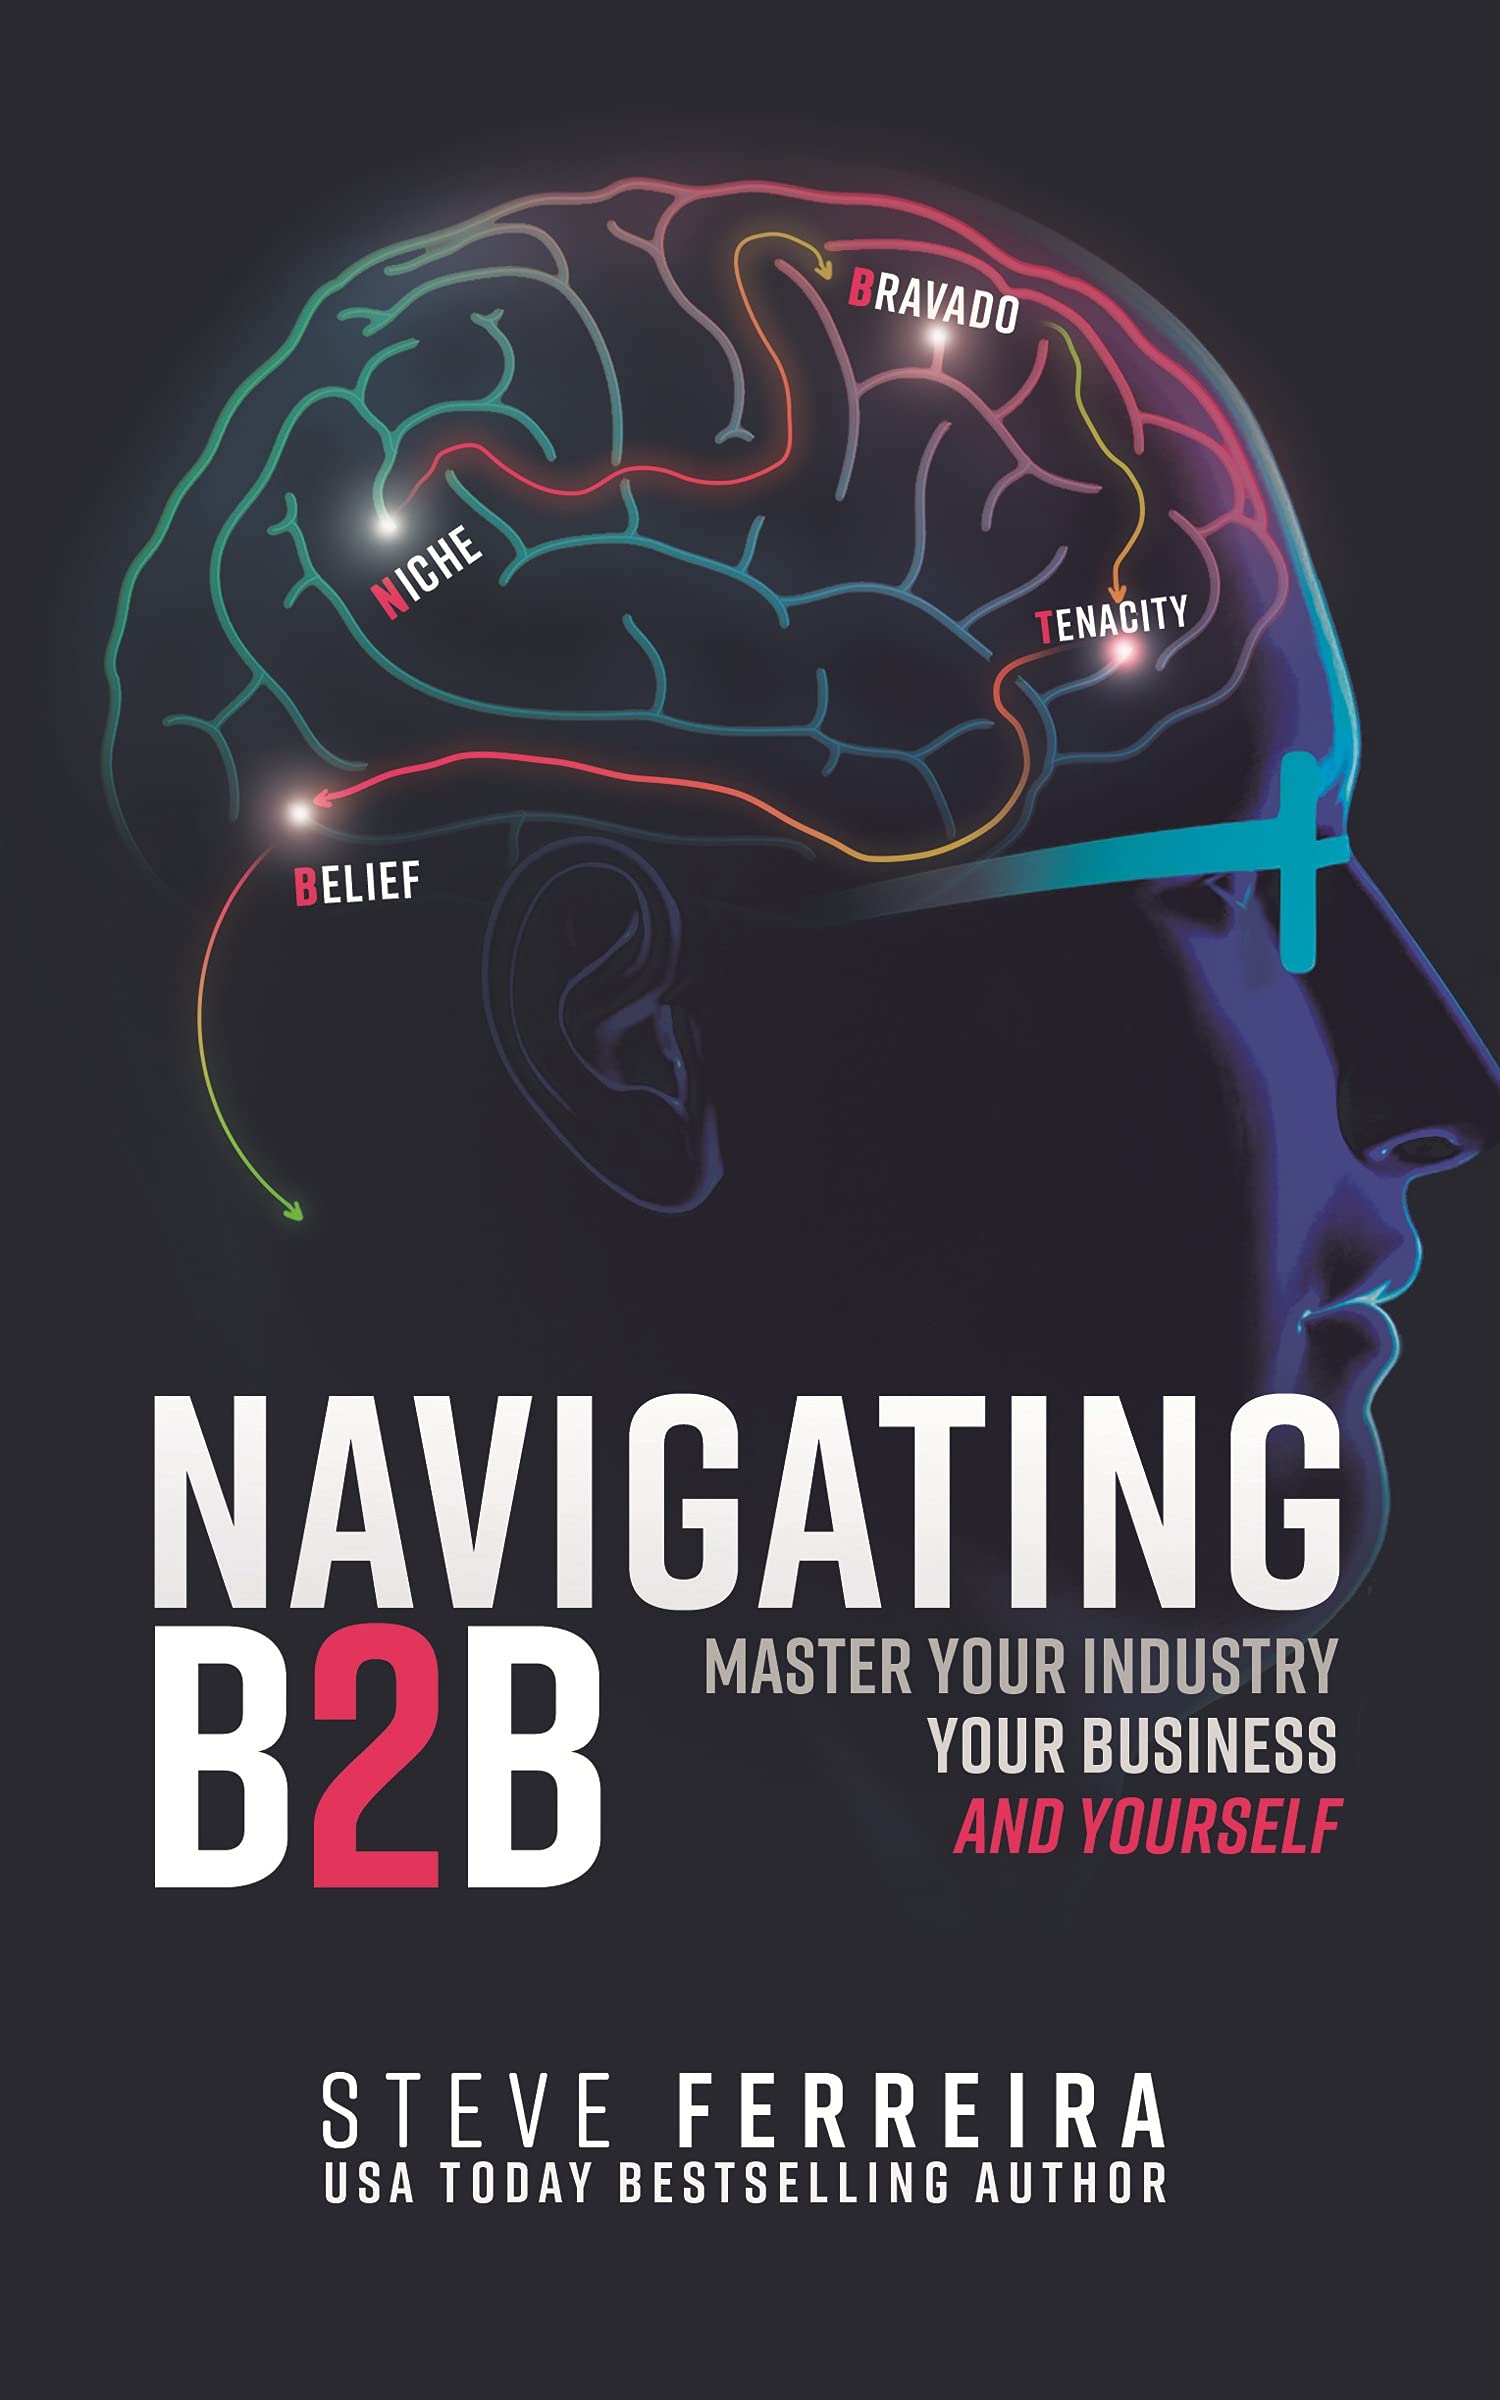 Navigating B2B: Master Your Industry, Your Business, and Yourself